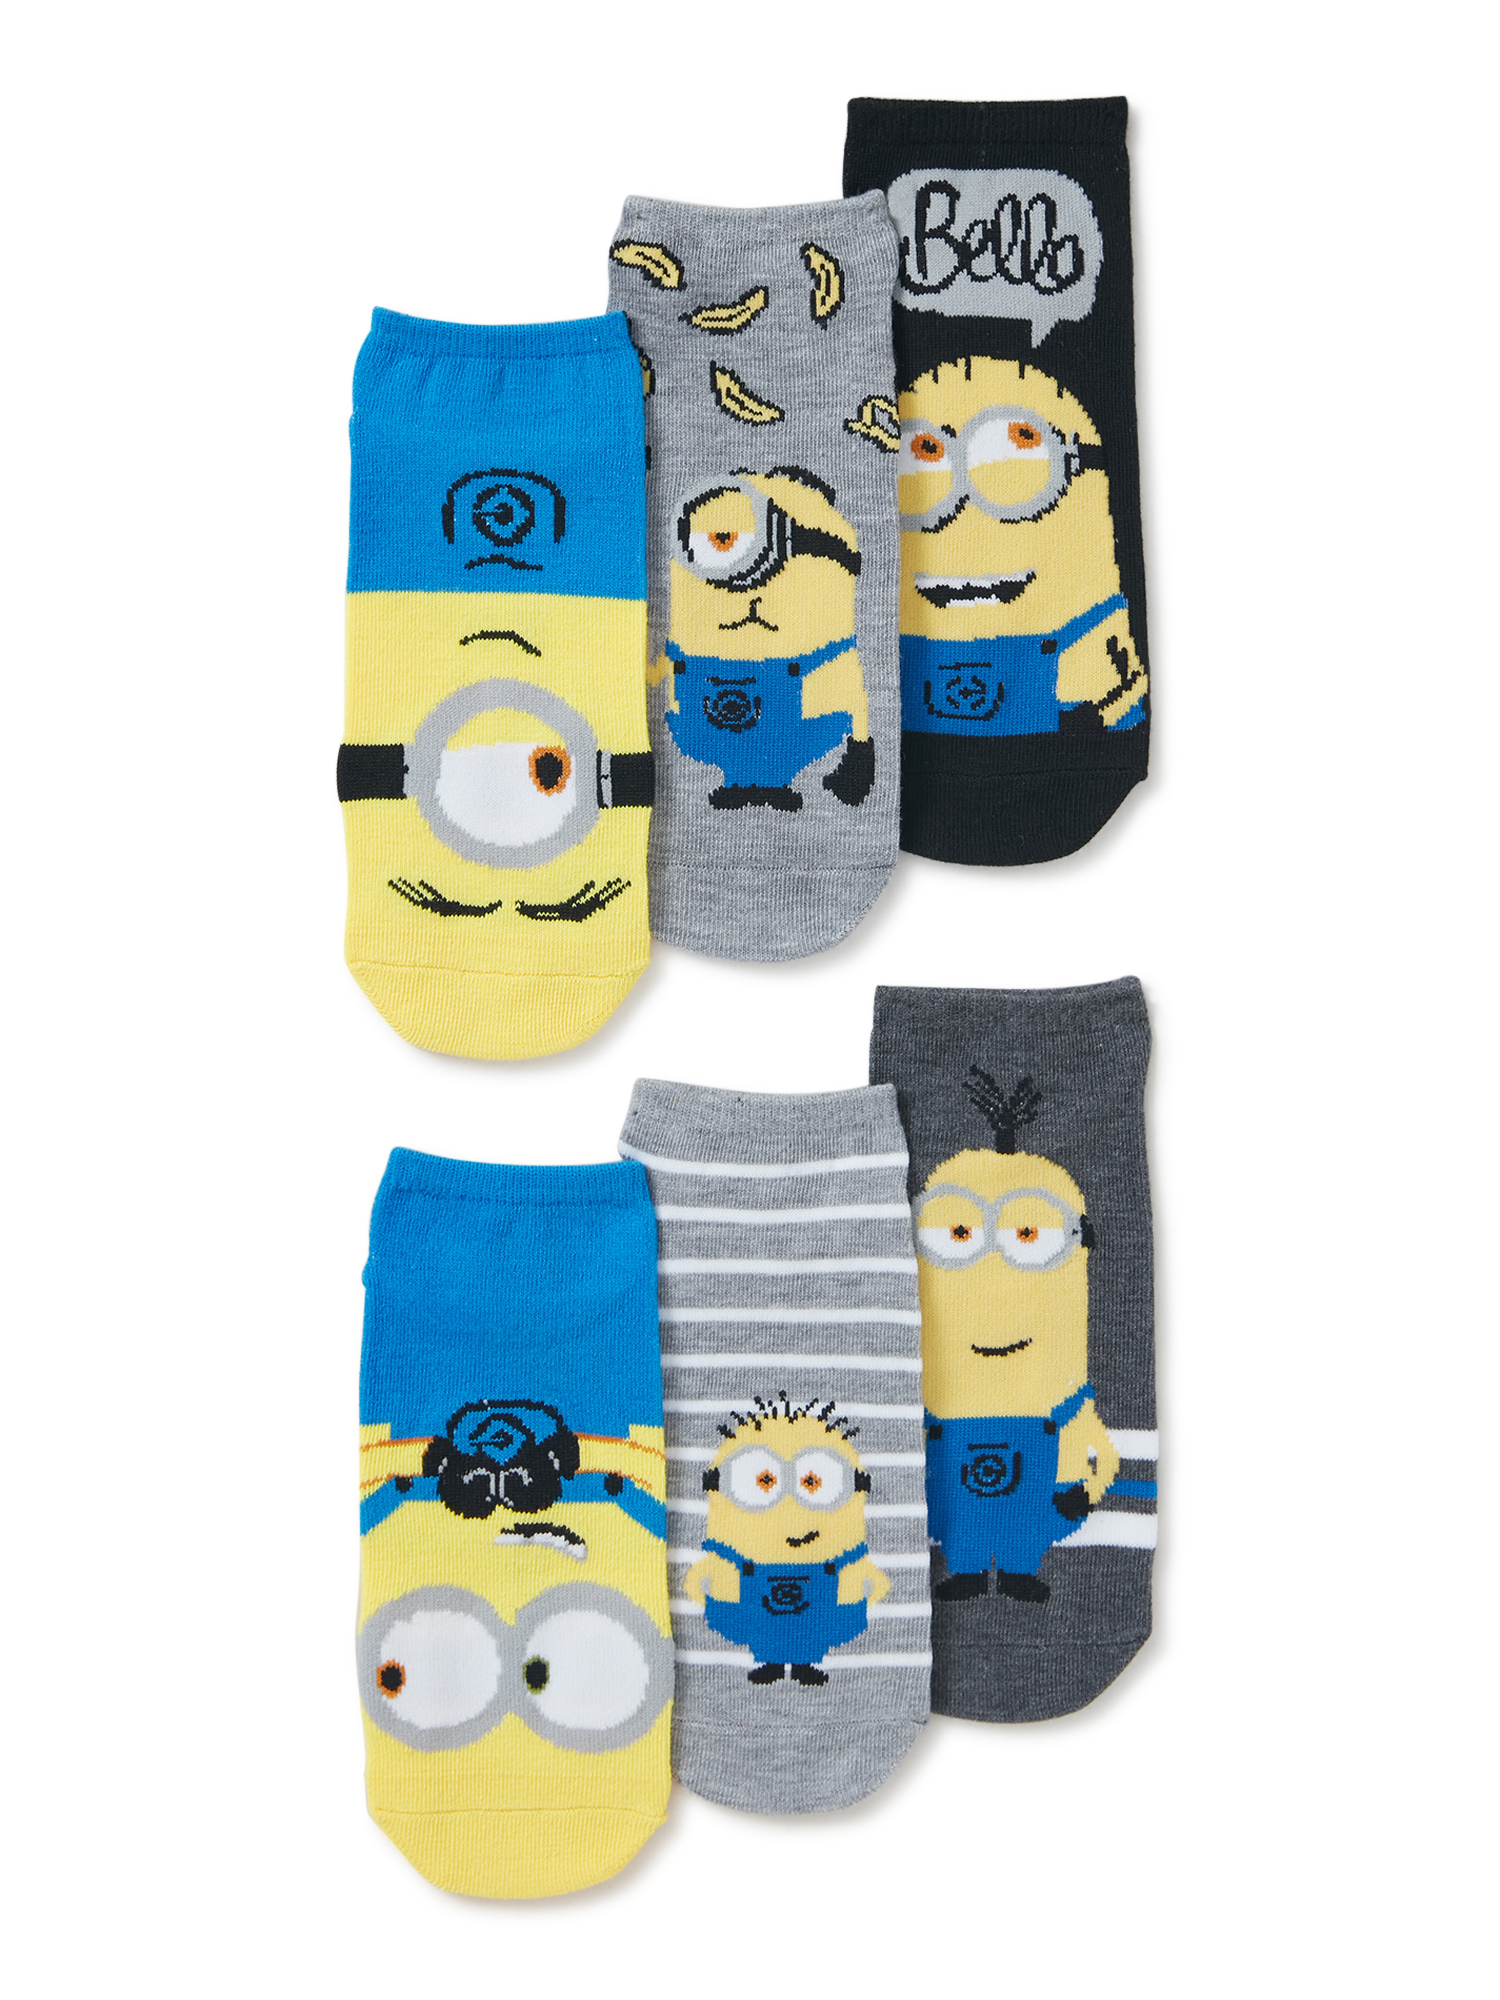 Minions Women's No Show Socks, 6-Pack - image 1 of 2